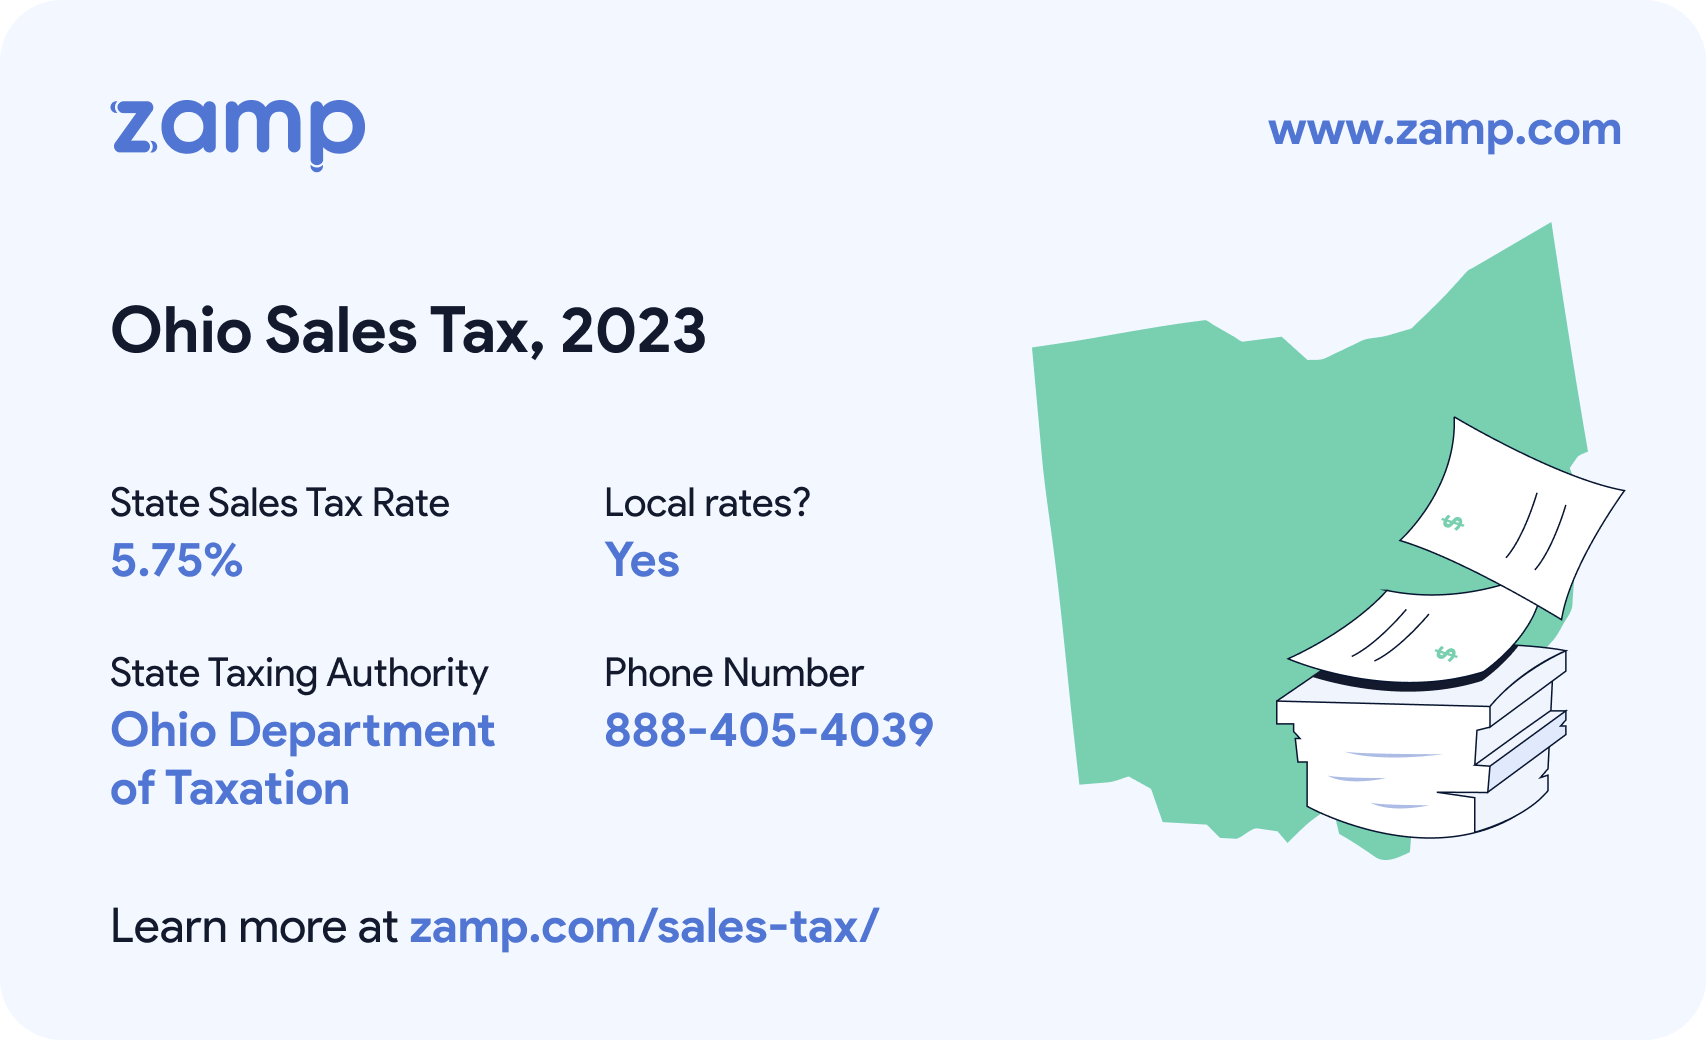 Ohio Sales Tax 2023 vital info; Sales Tax Rate: 5.75%, Has local sales tax? Yes; Taxing Authority: Ohio Department of Taxation; Sales tax phone number: 888-405-4039